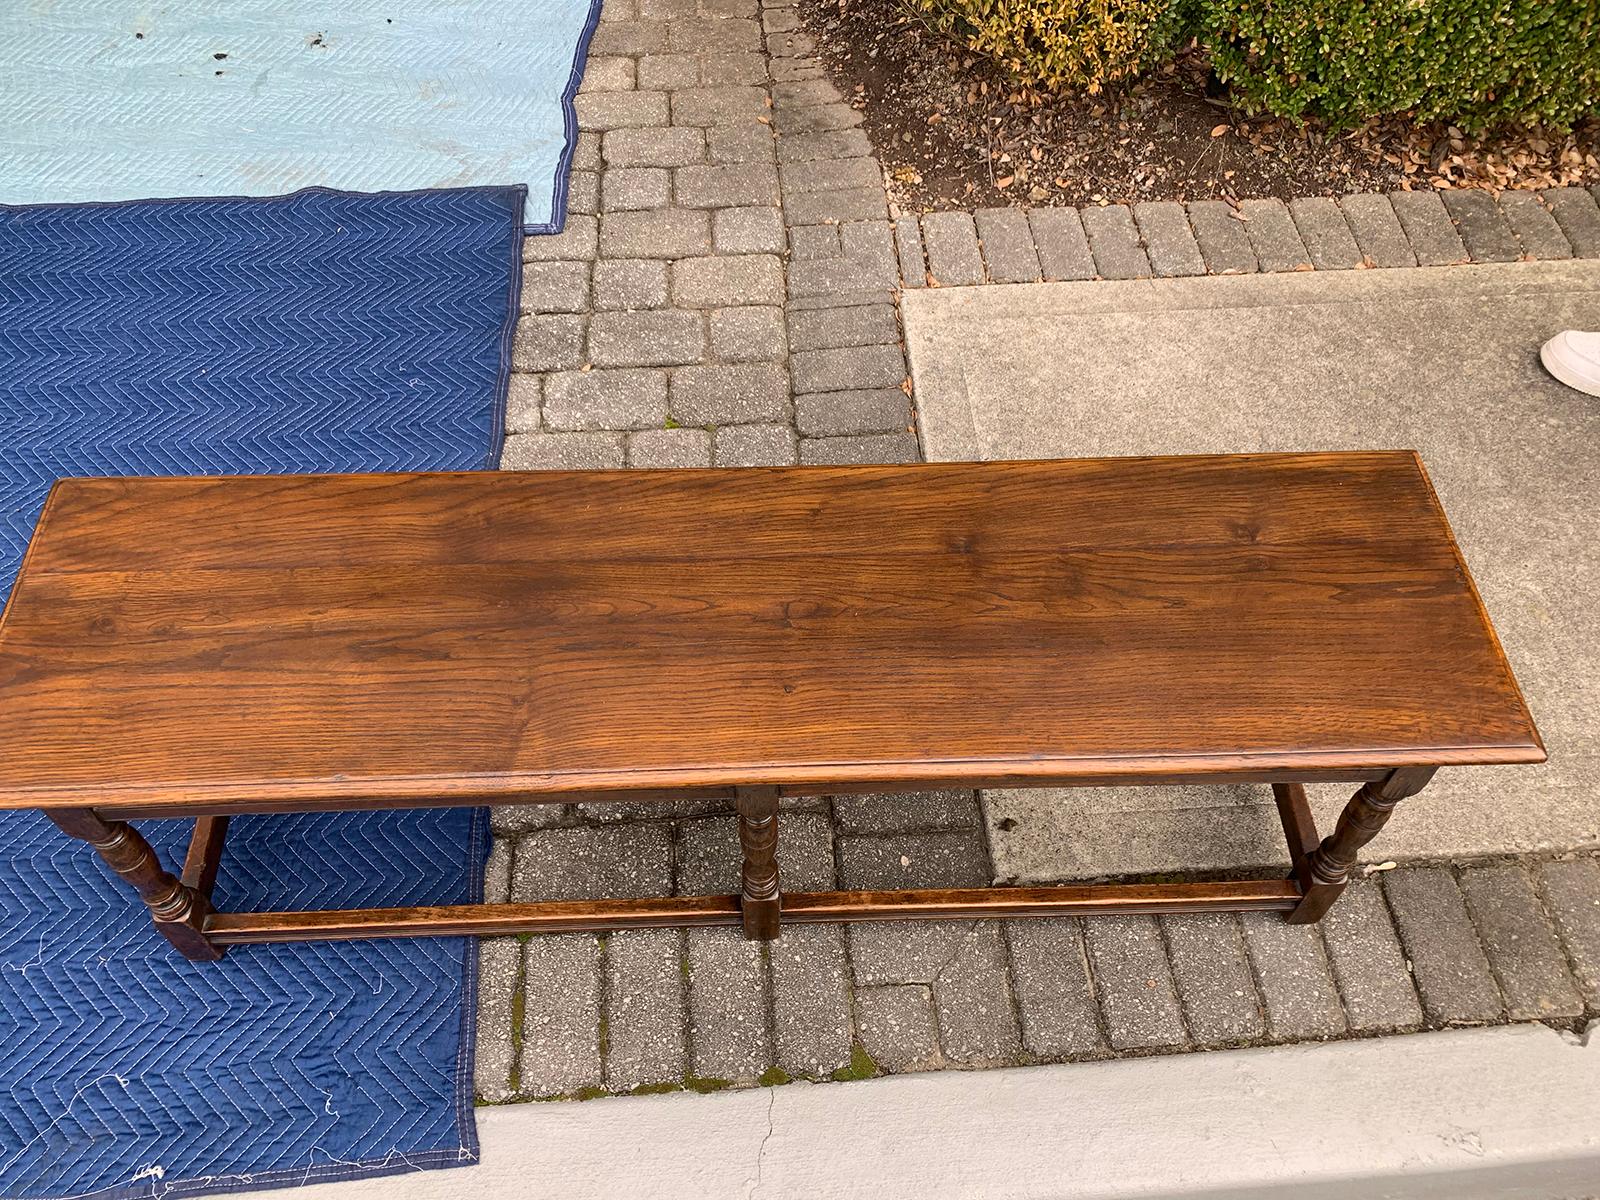 Long English Wood Coffee Table or Joint Stool Bench, circa 1900s-1930s 3